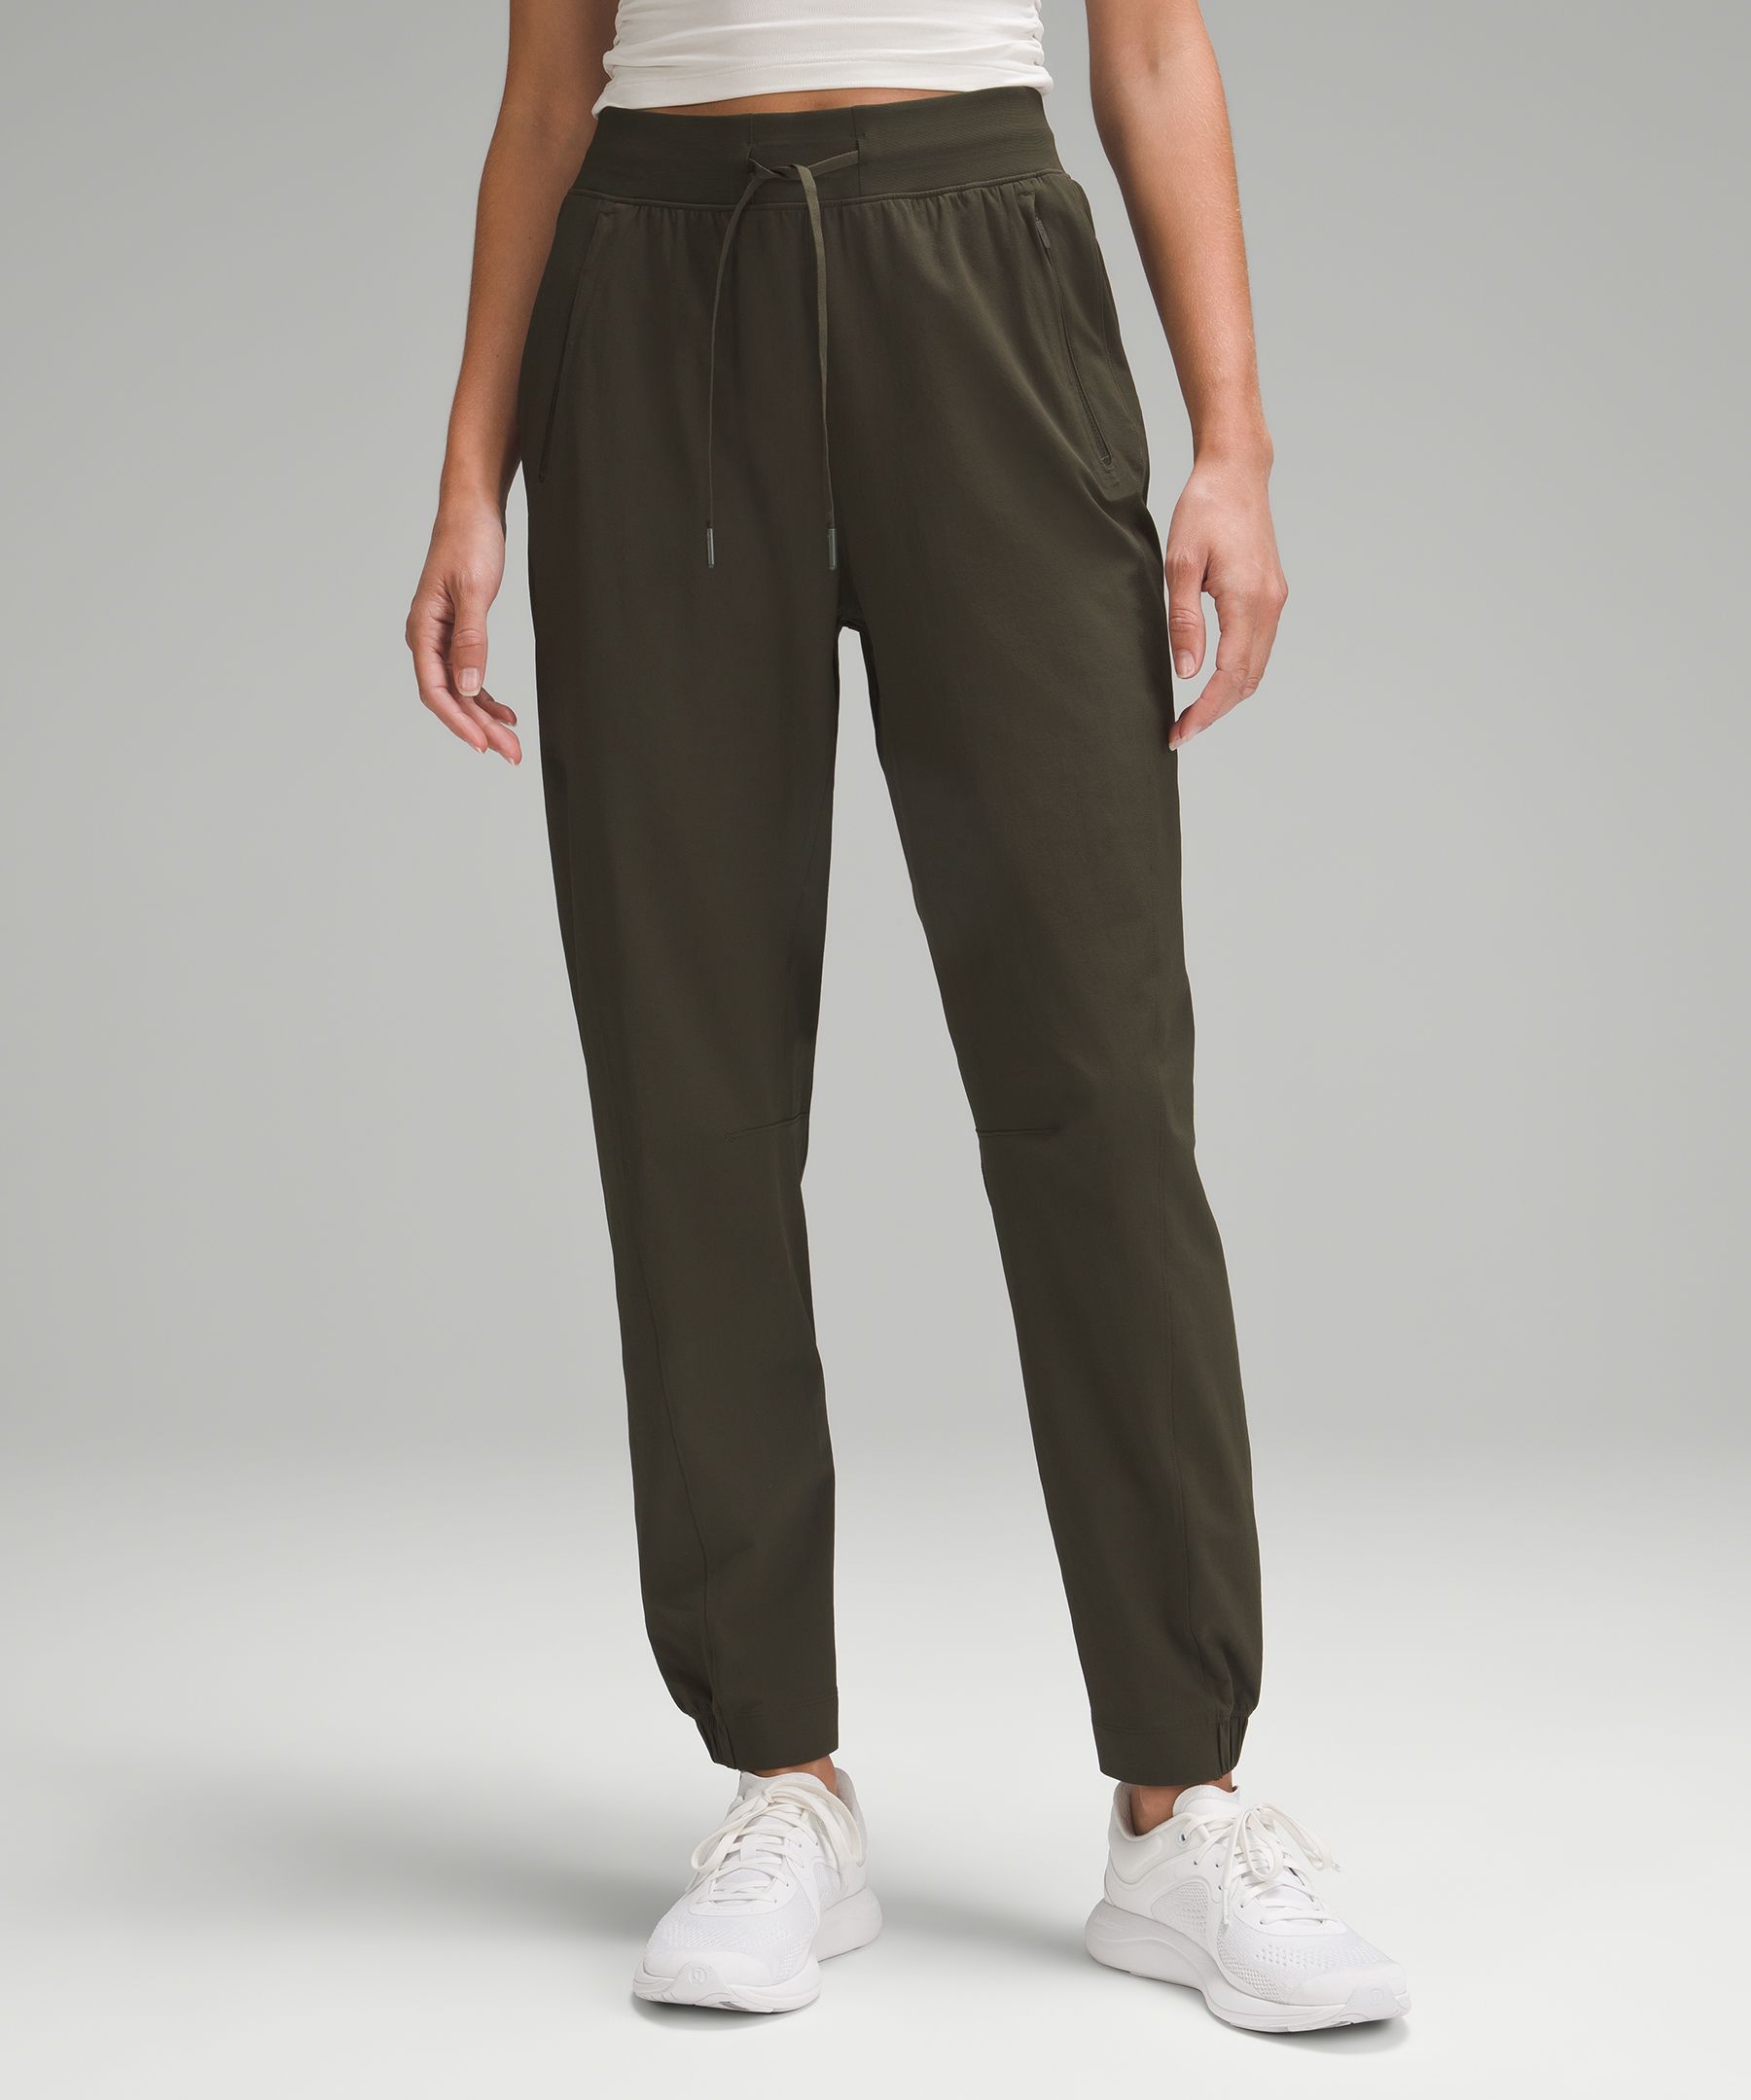 License to Train High-Rise Pant, Women's Joggers